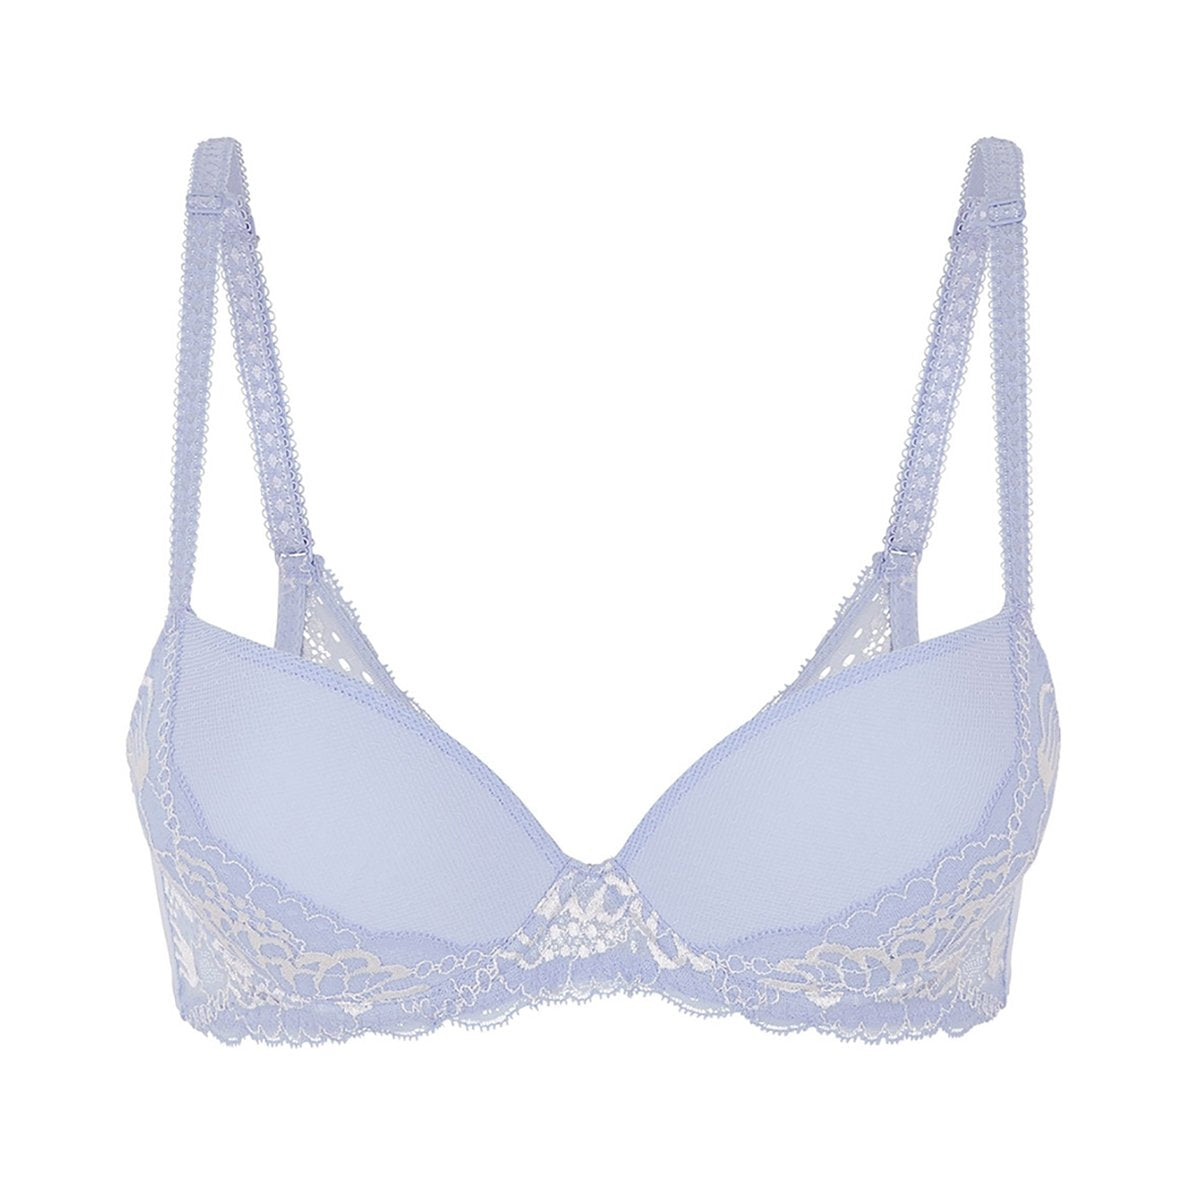 Simone Perele Promesse Push Up Bra 12H340 in Frozen baby blue front view off-figure